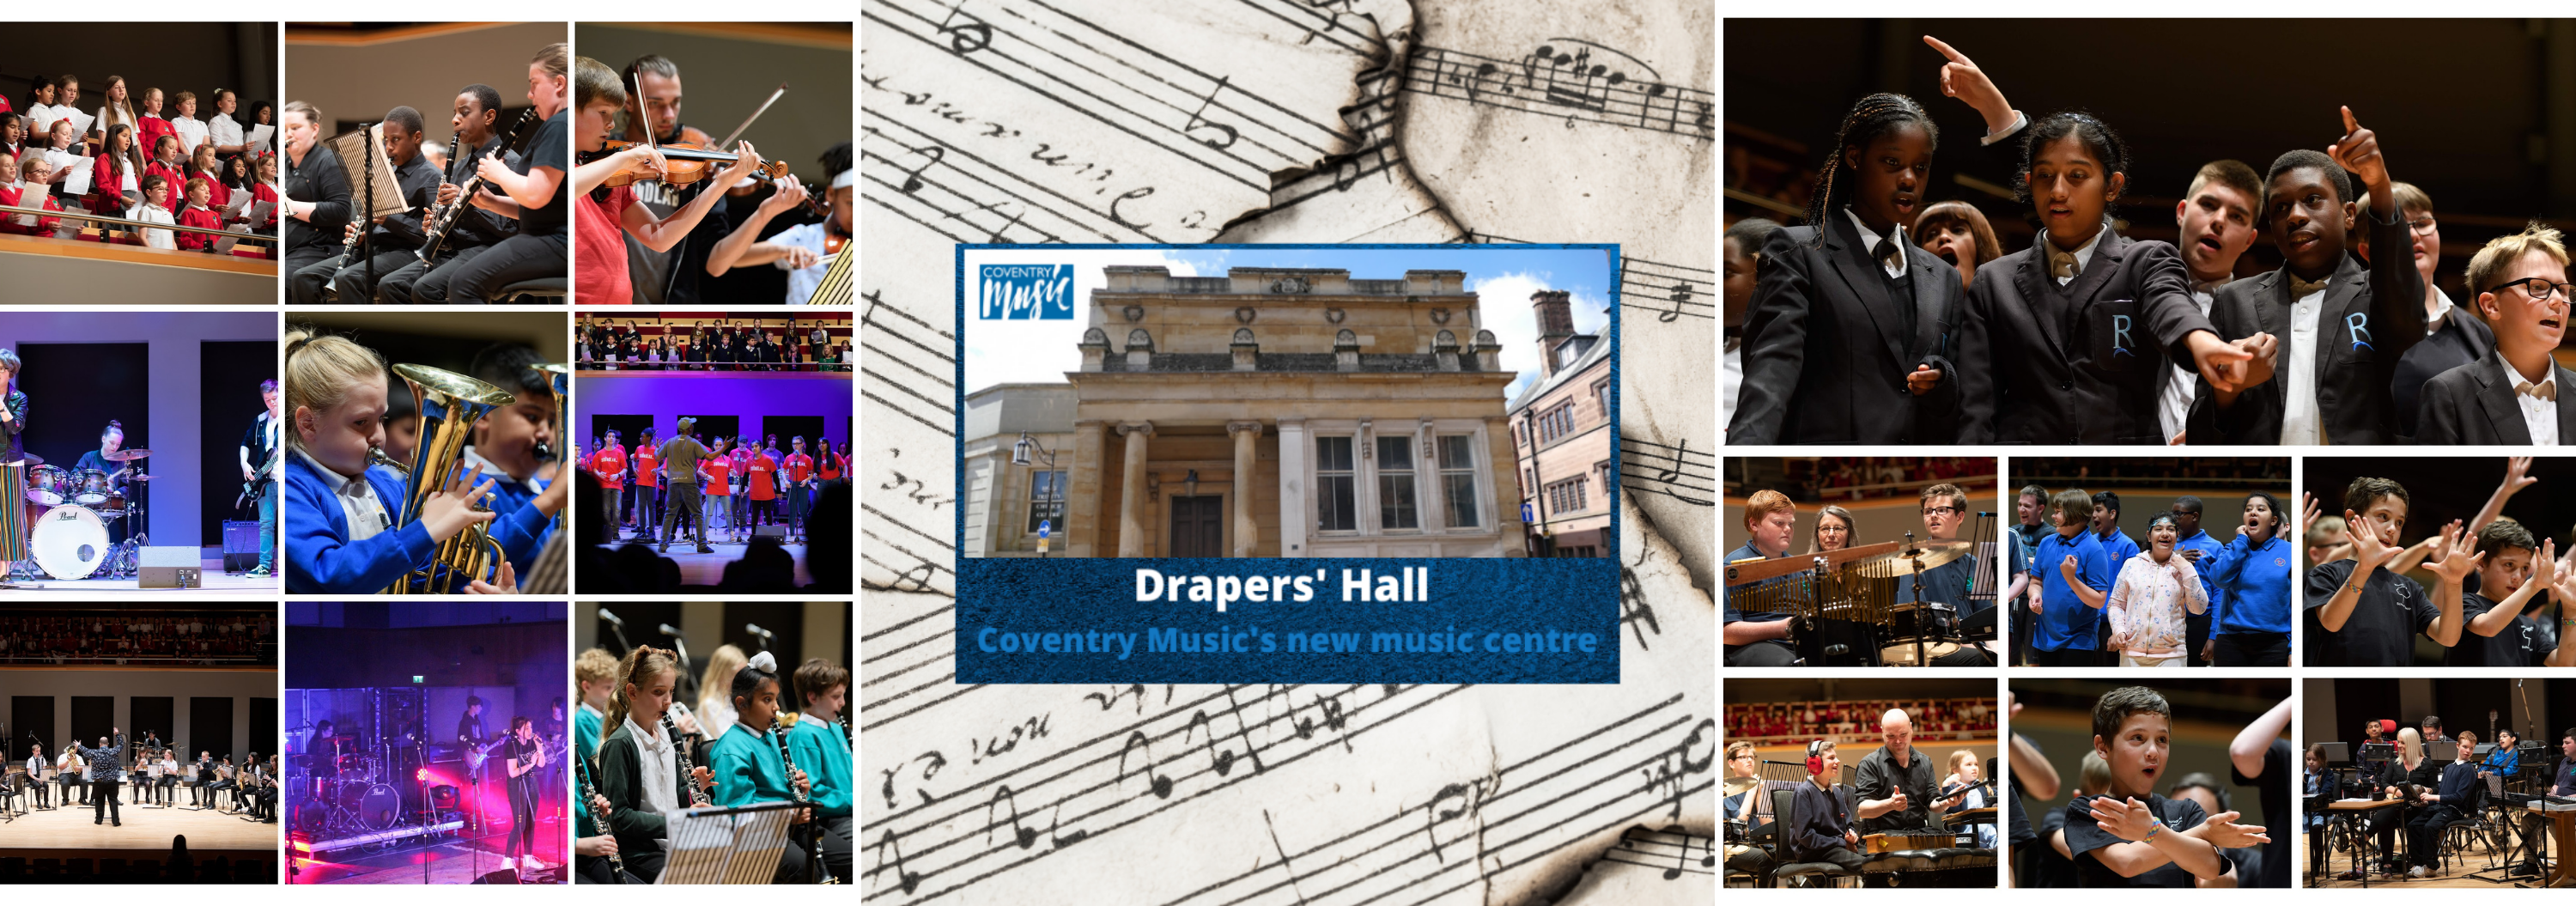 website banner image witgh lots of images of children playing and Drapers' Hall image